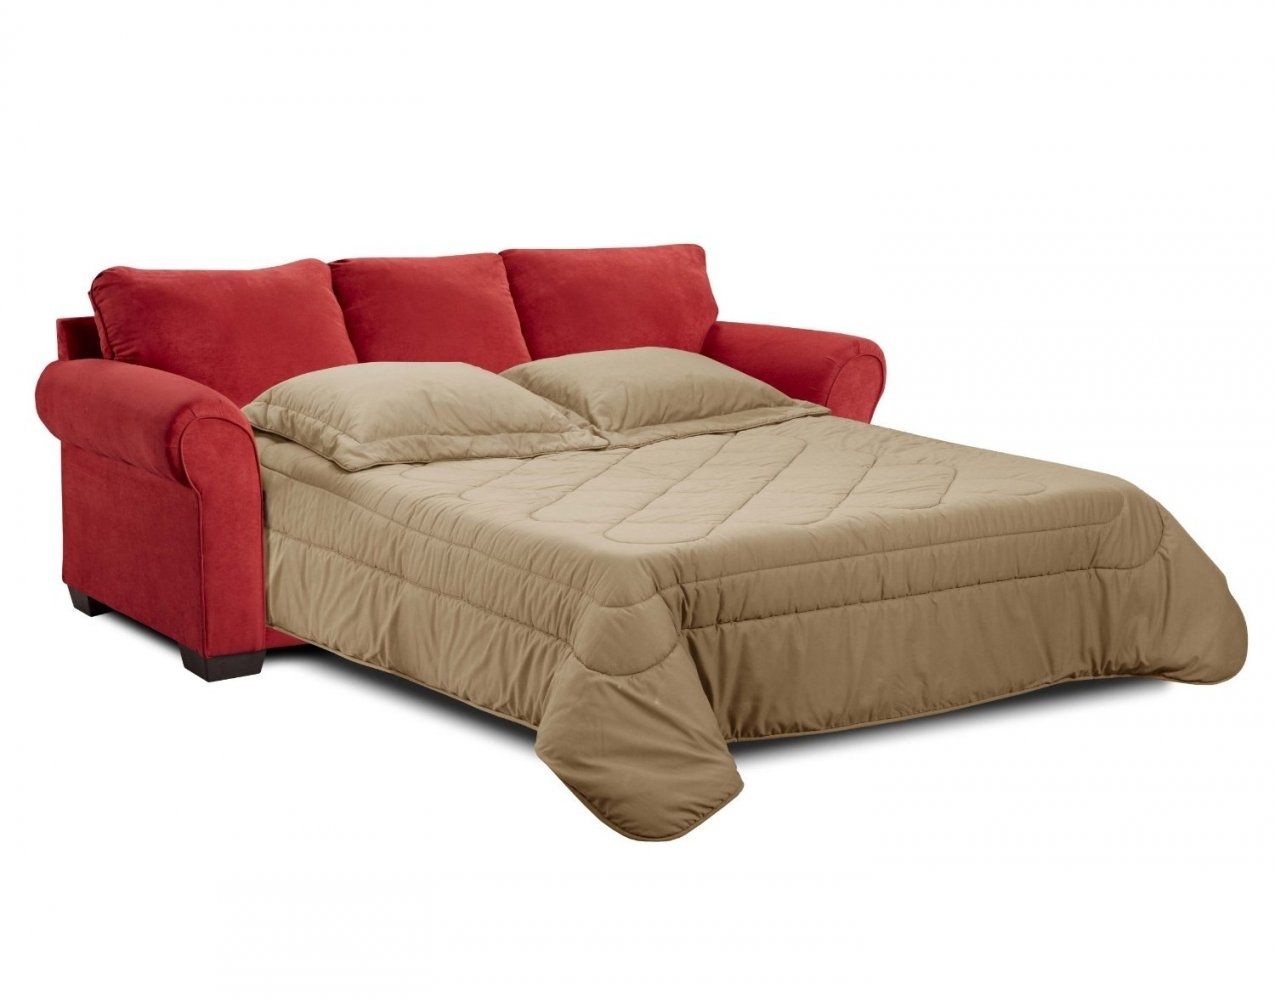 Queen Size Sleeper Sofa 98 On Sofa Room Ideas With Queen Intended Pertaining To Queen Size Sofas (Photo 2 of 10)